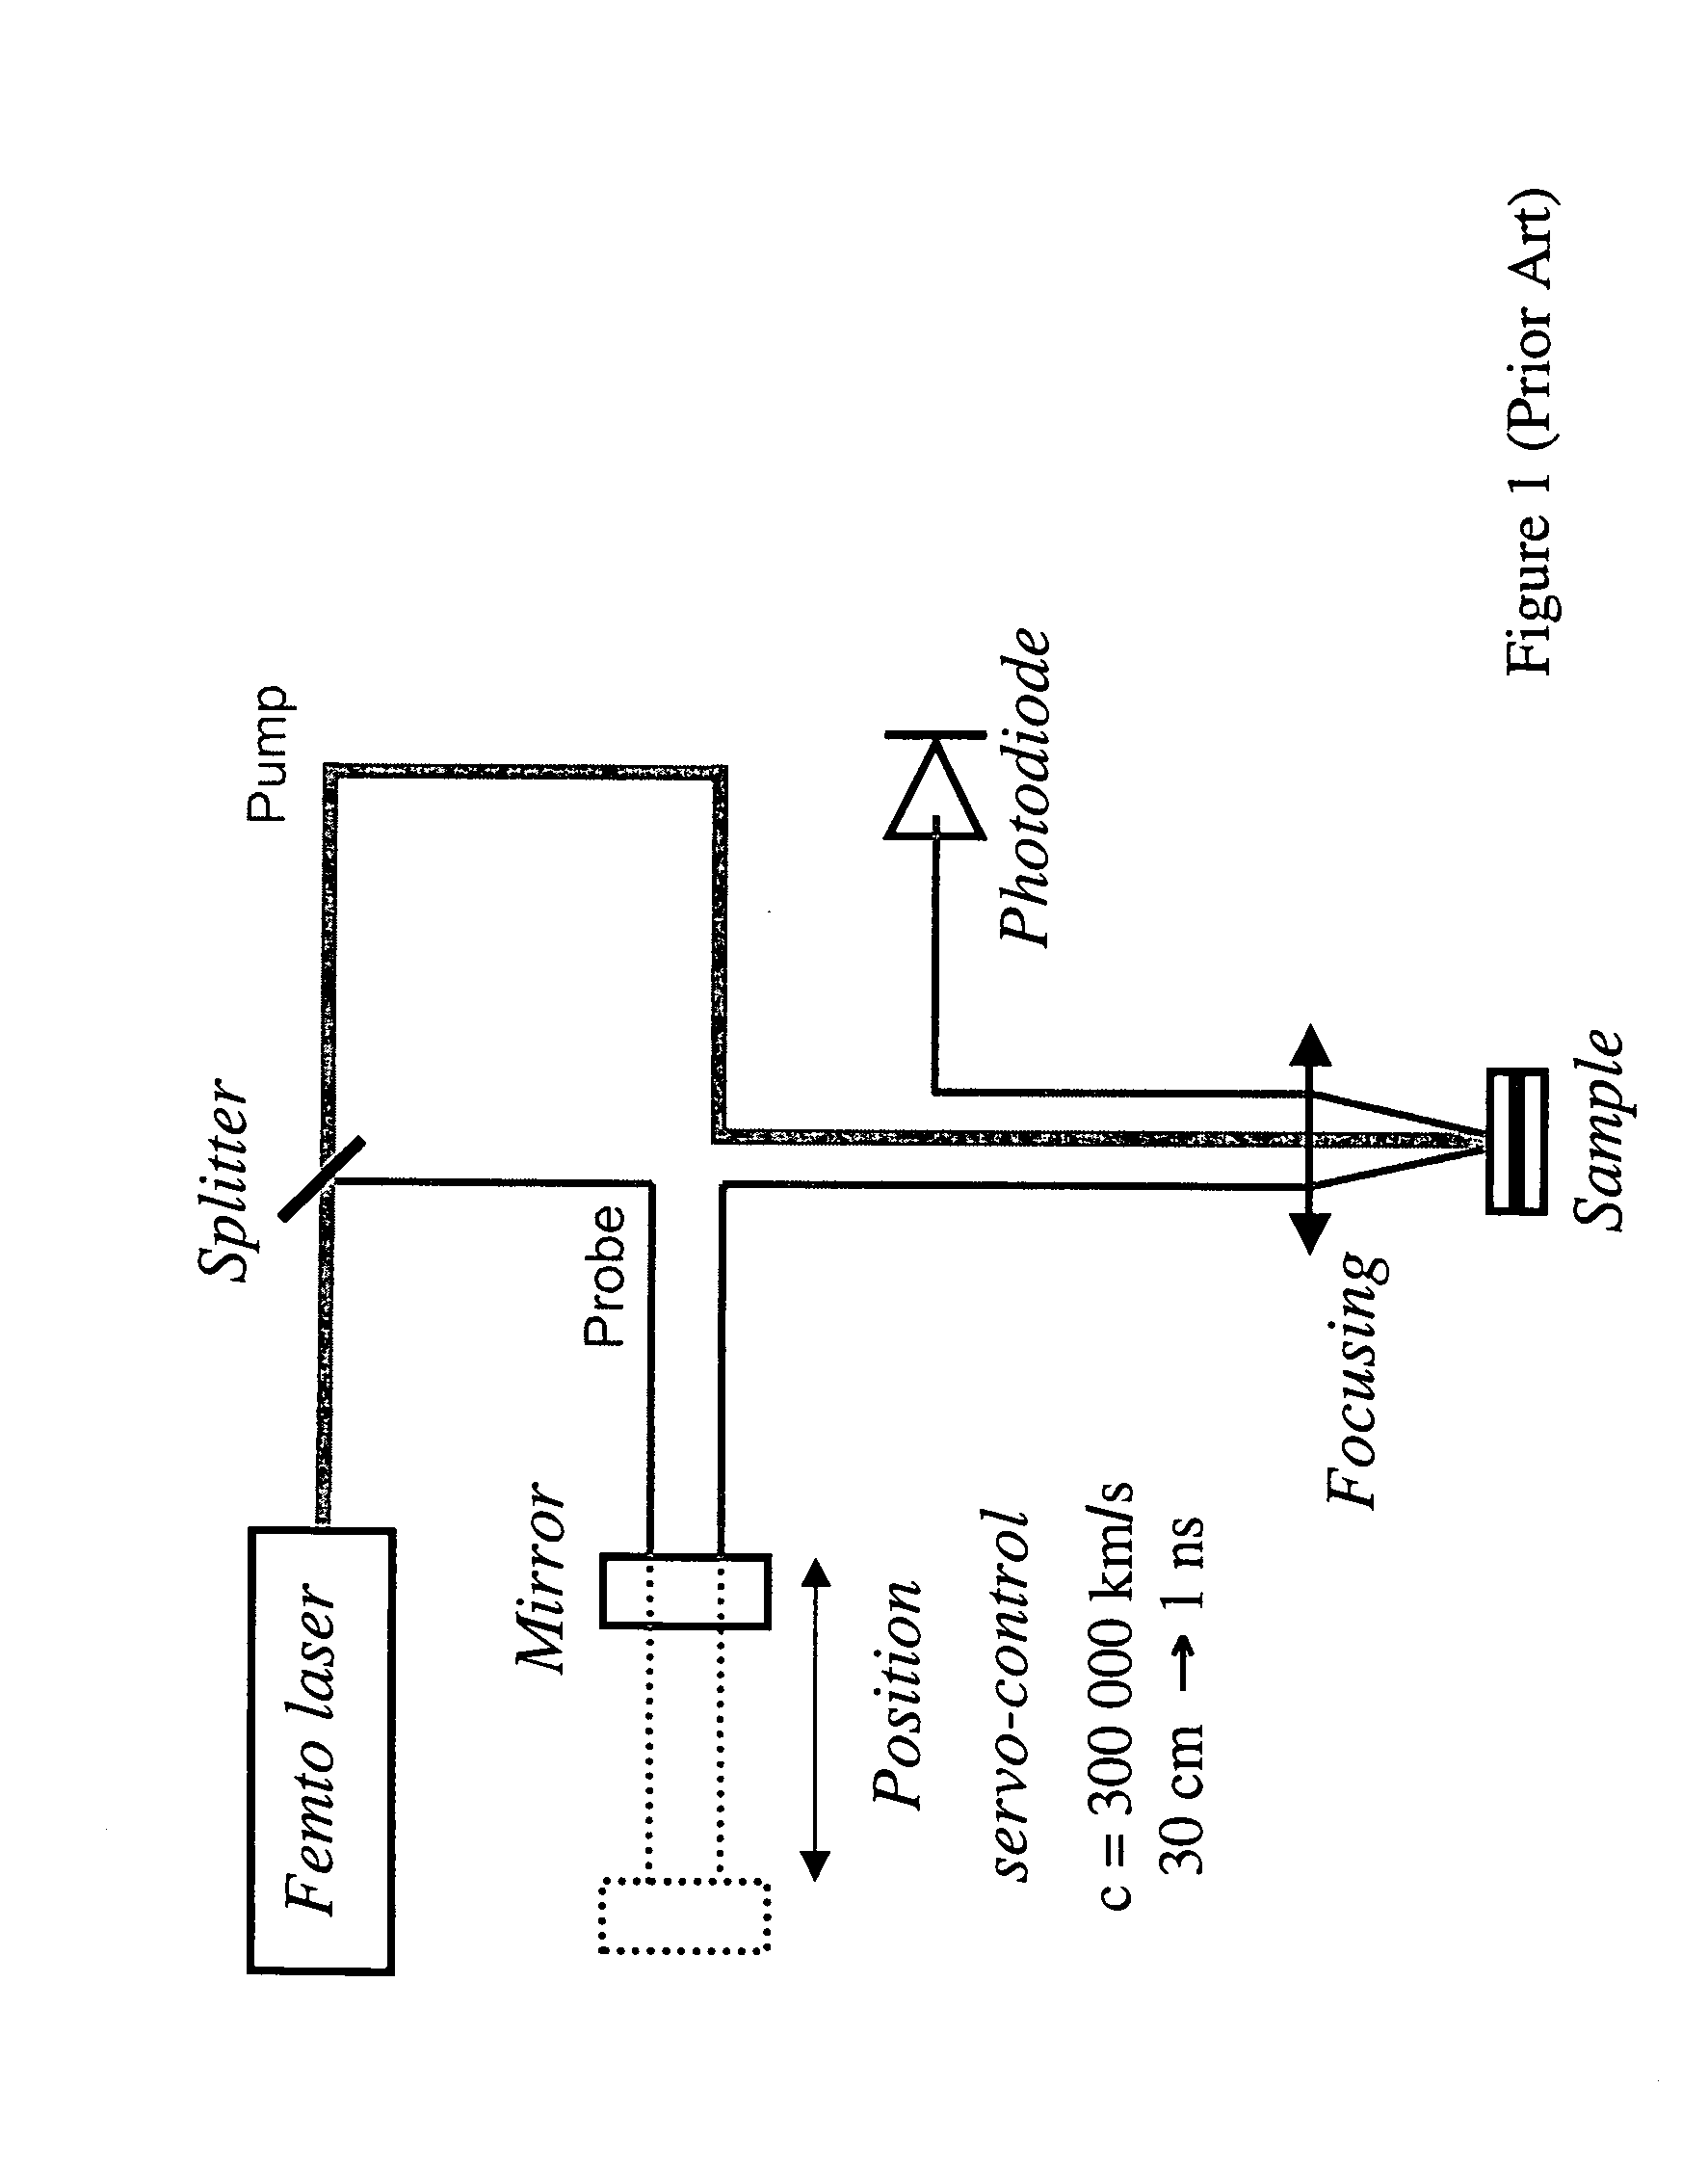 Method and Device for Characterising a Structure by Wavelength Effect in a Photoacoustic System